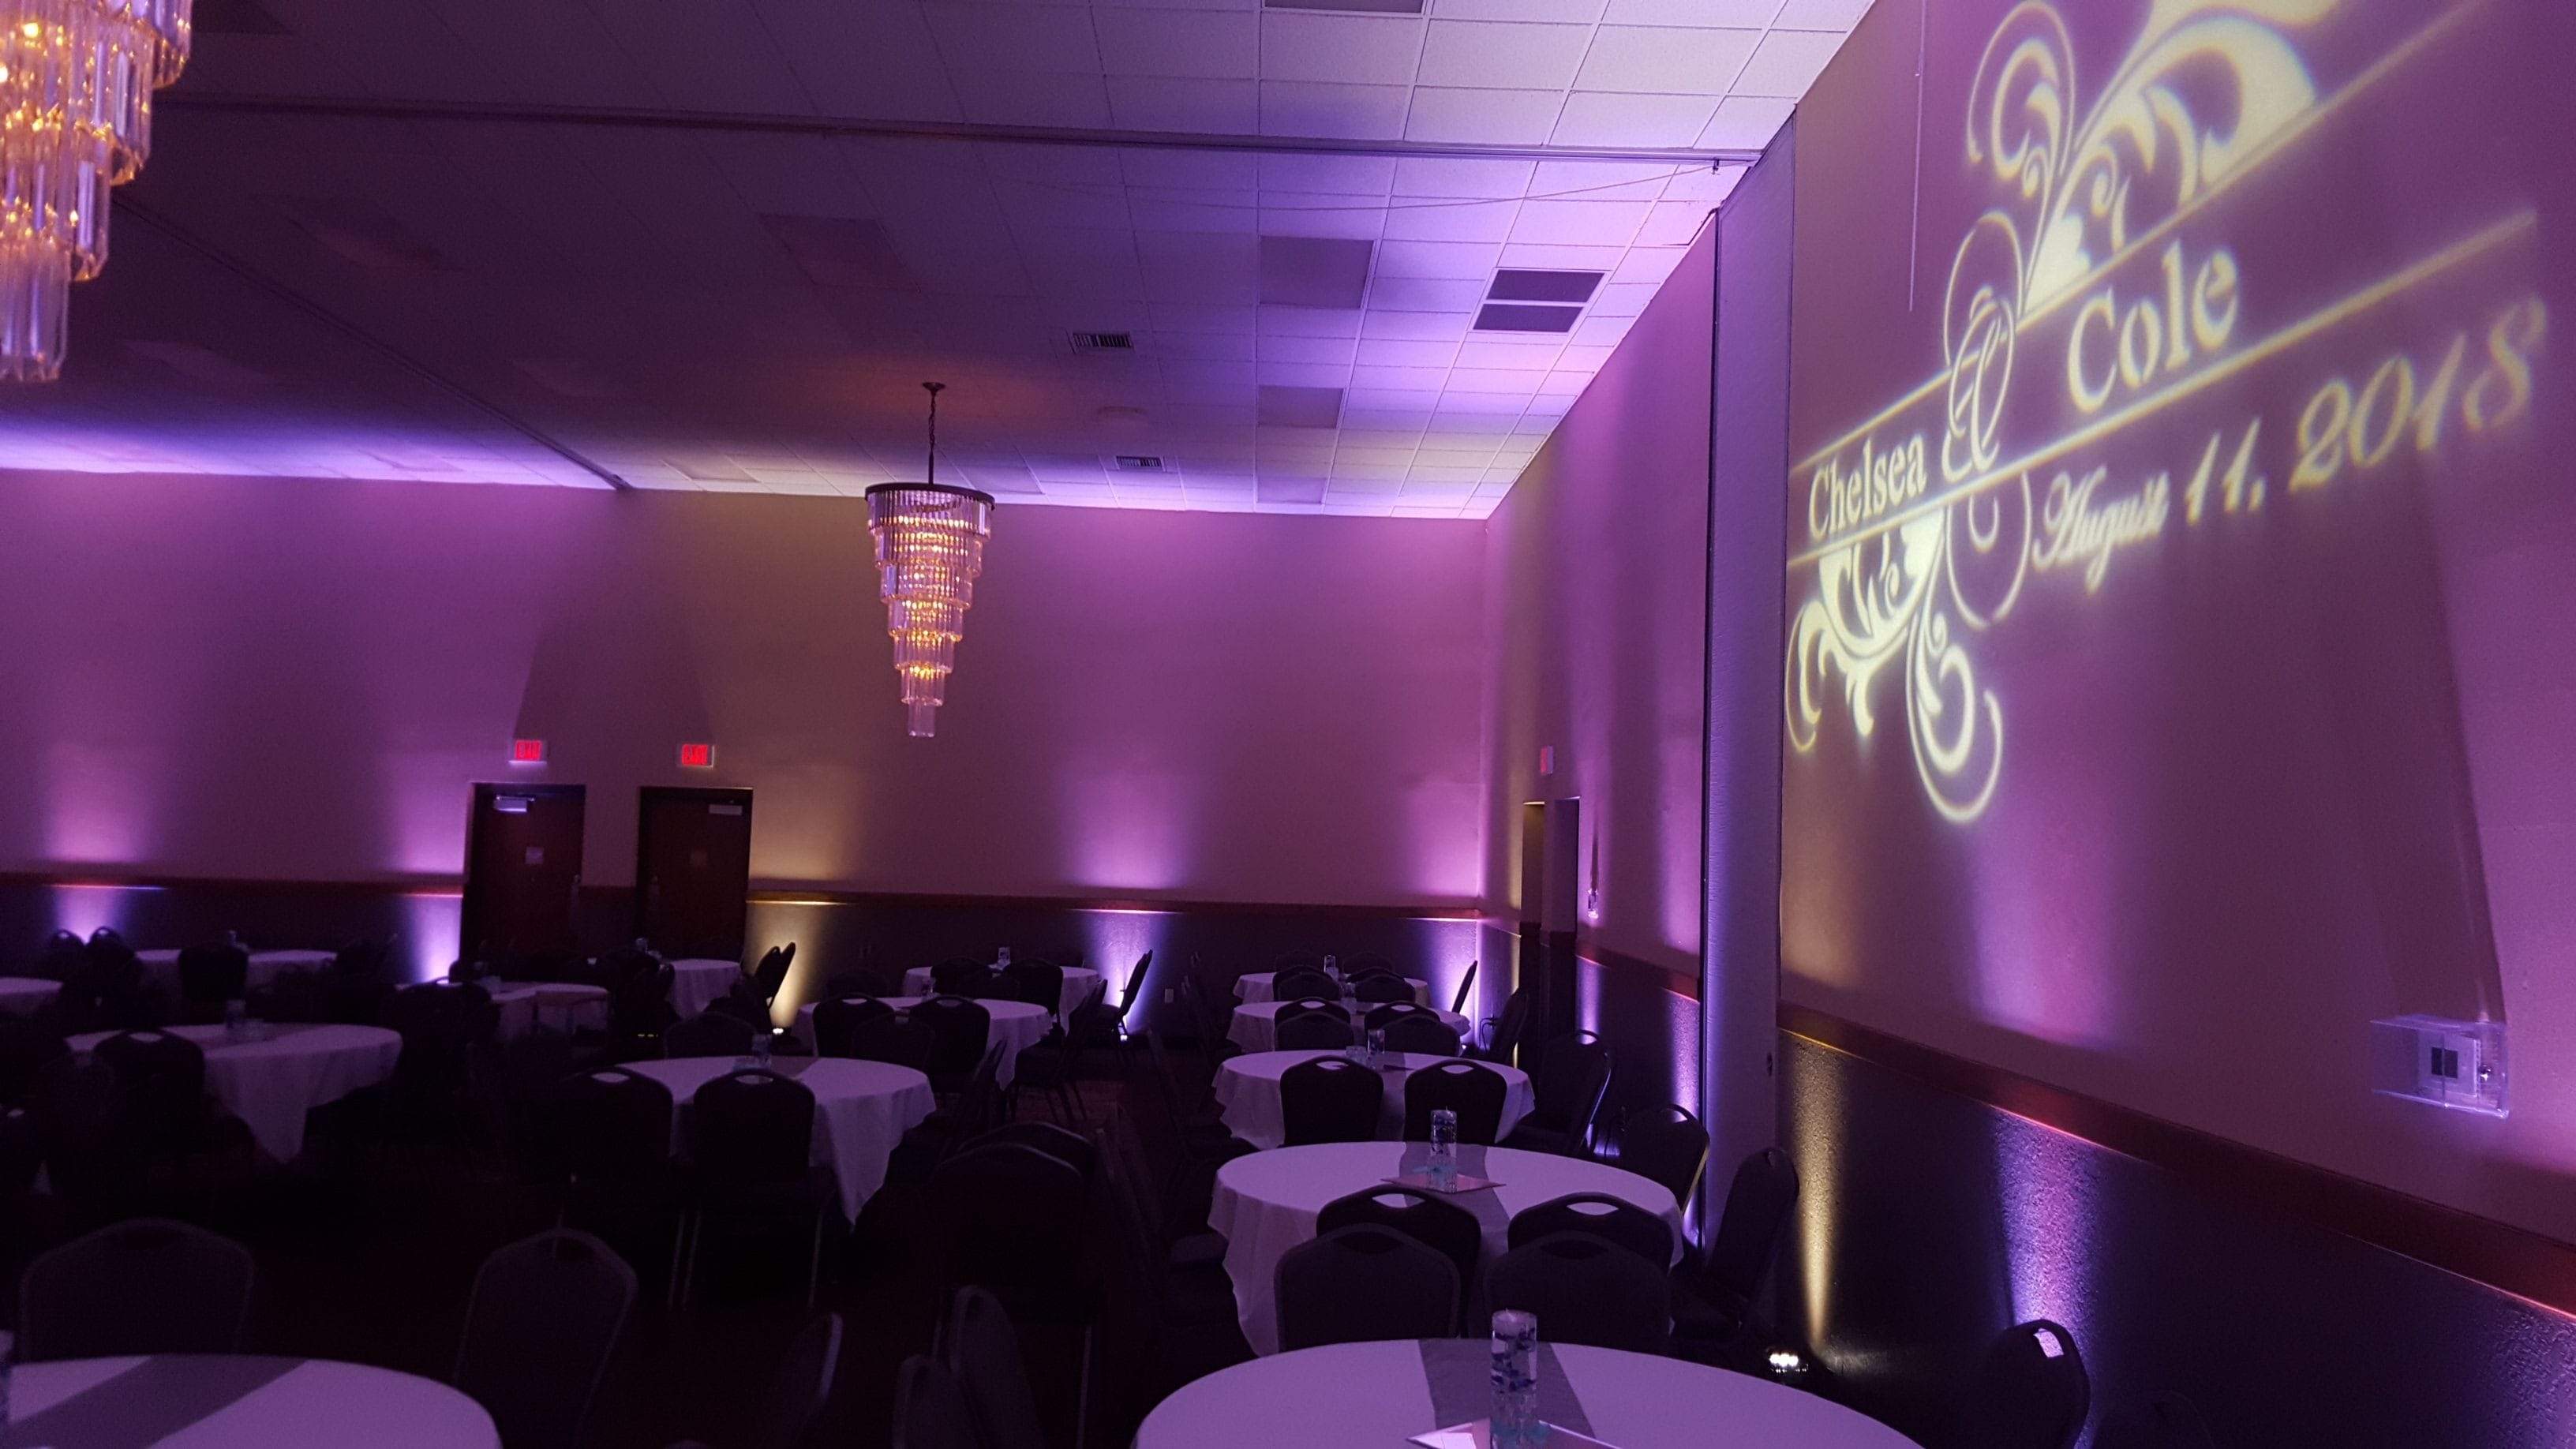 Wedding lighting at Barker's Island. Up lighting in lavender and soft white with a monogram.